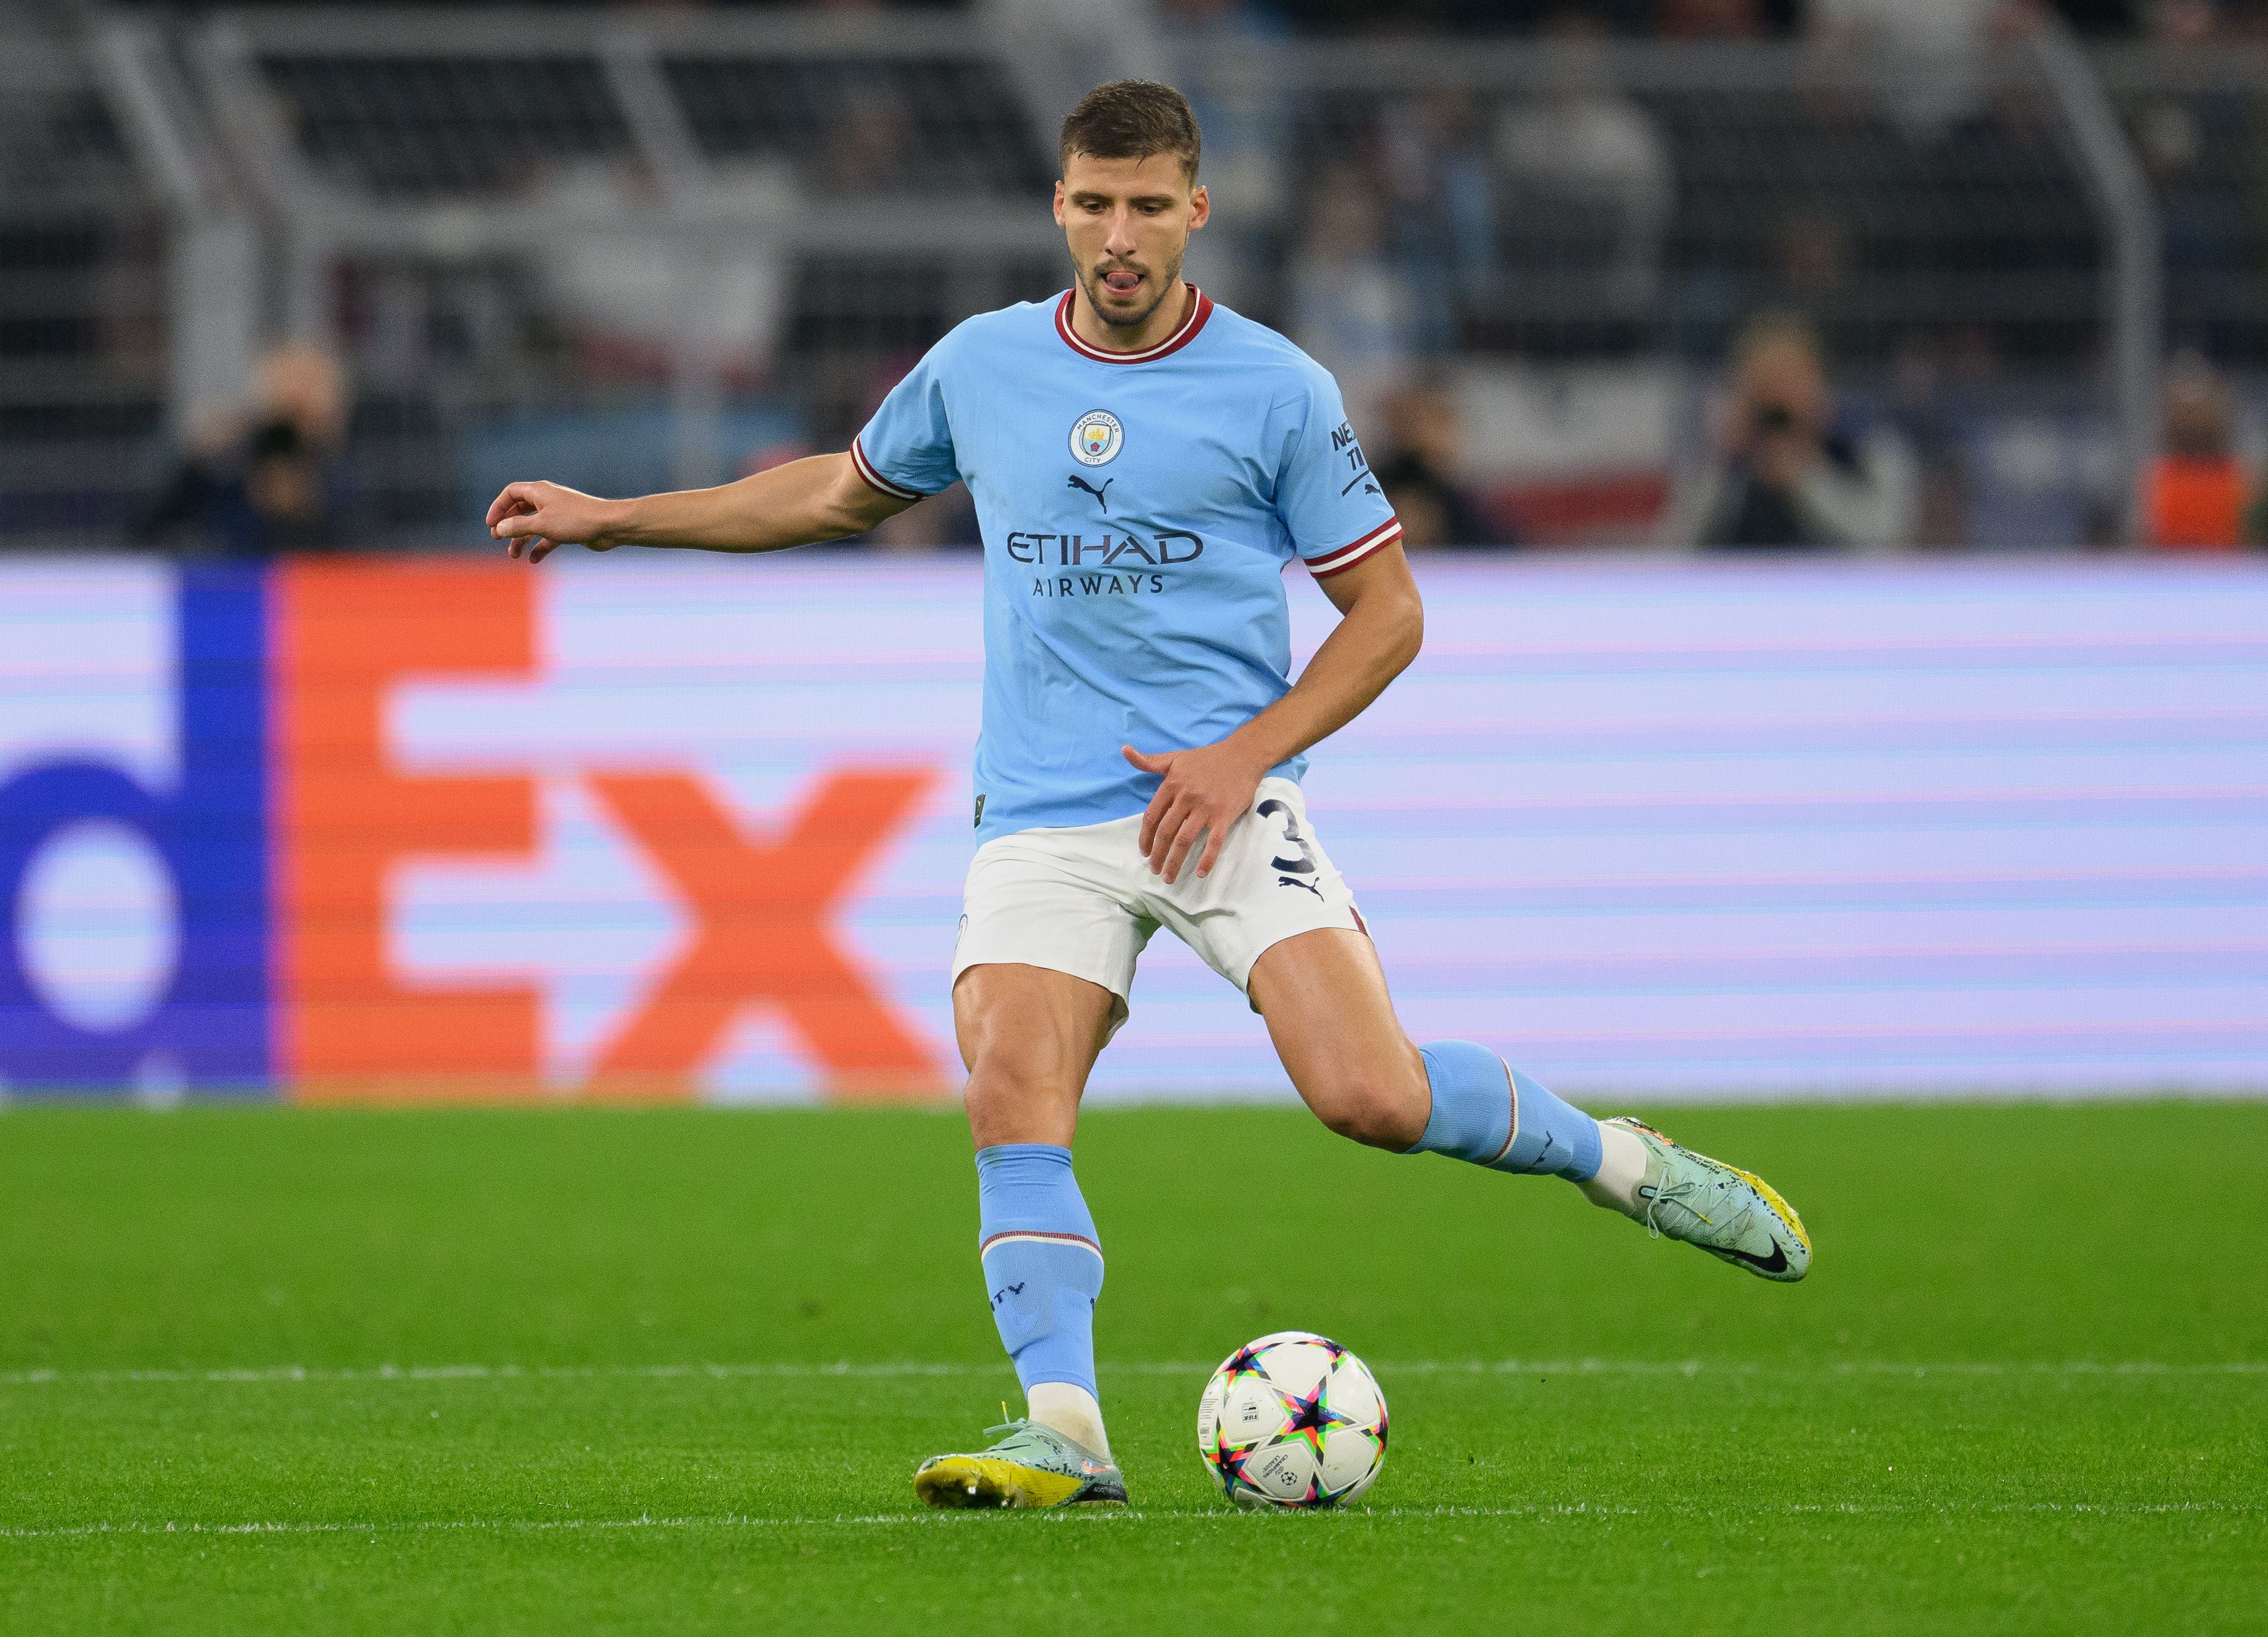 Ruben Dias playing for Manchester City